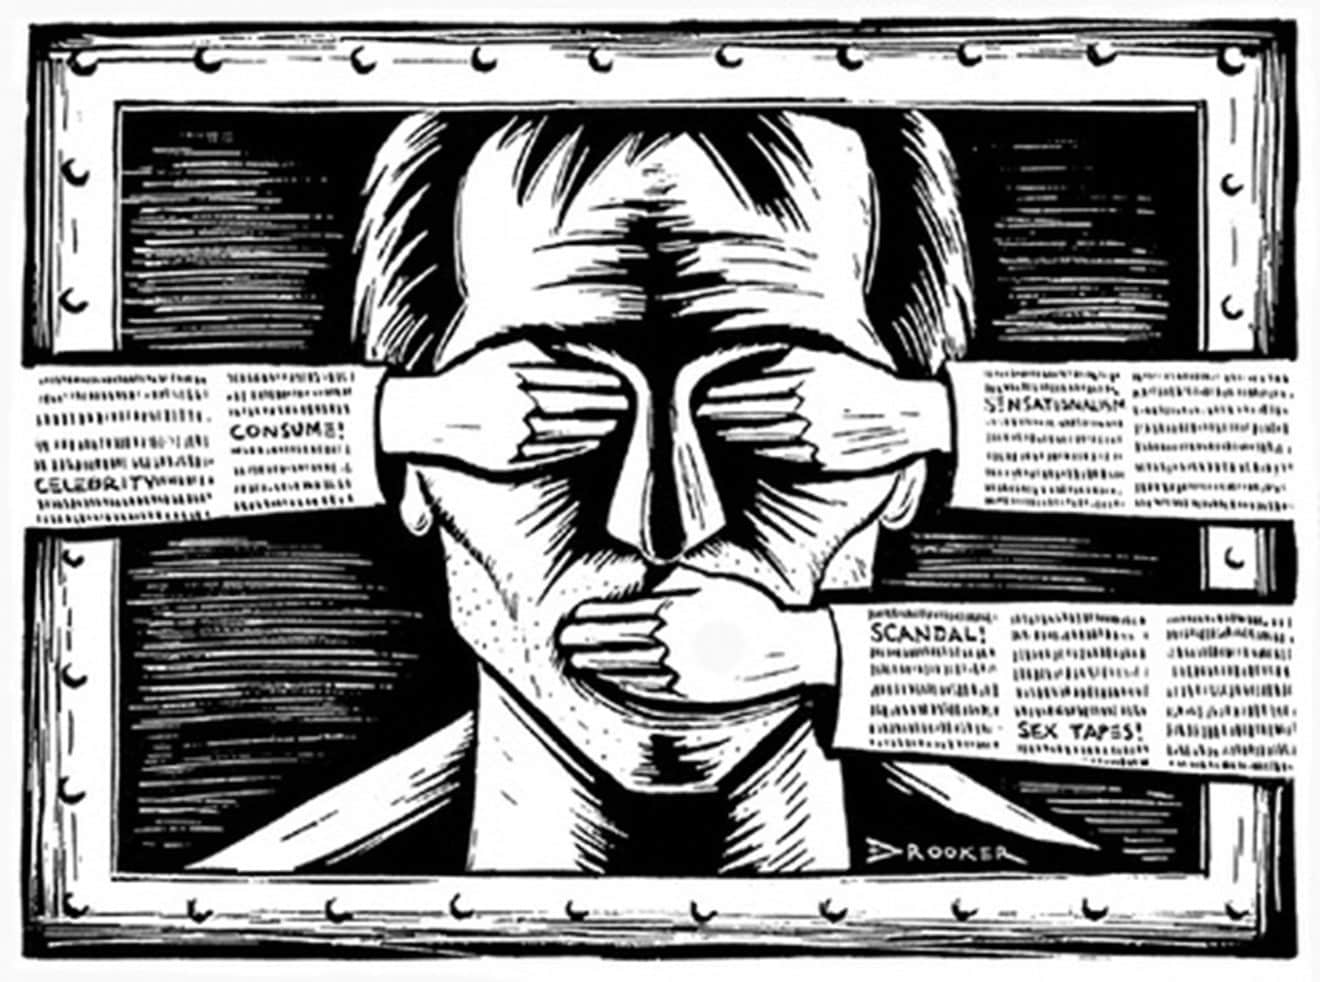 Big Tech's Censorship Continues To Squeeze Free Speech